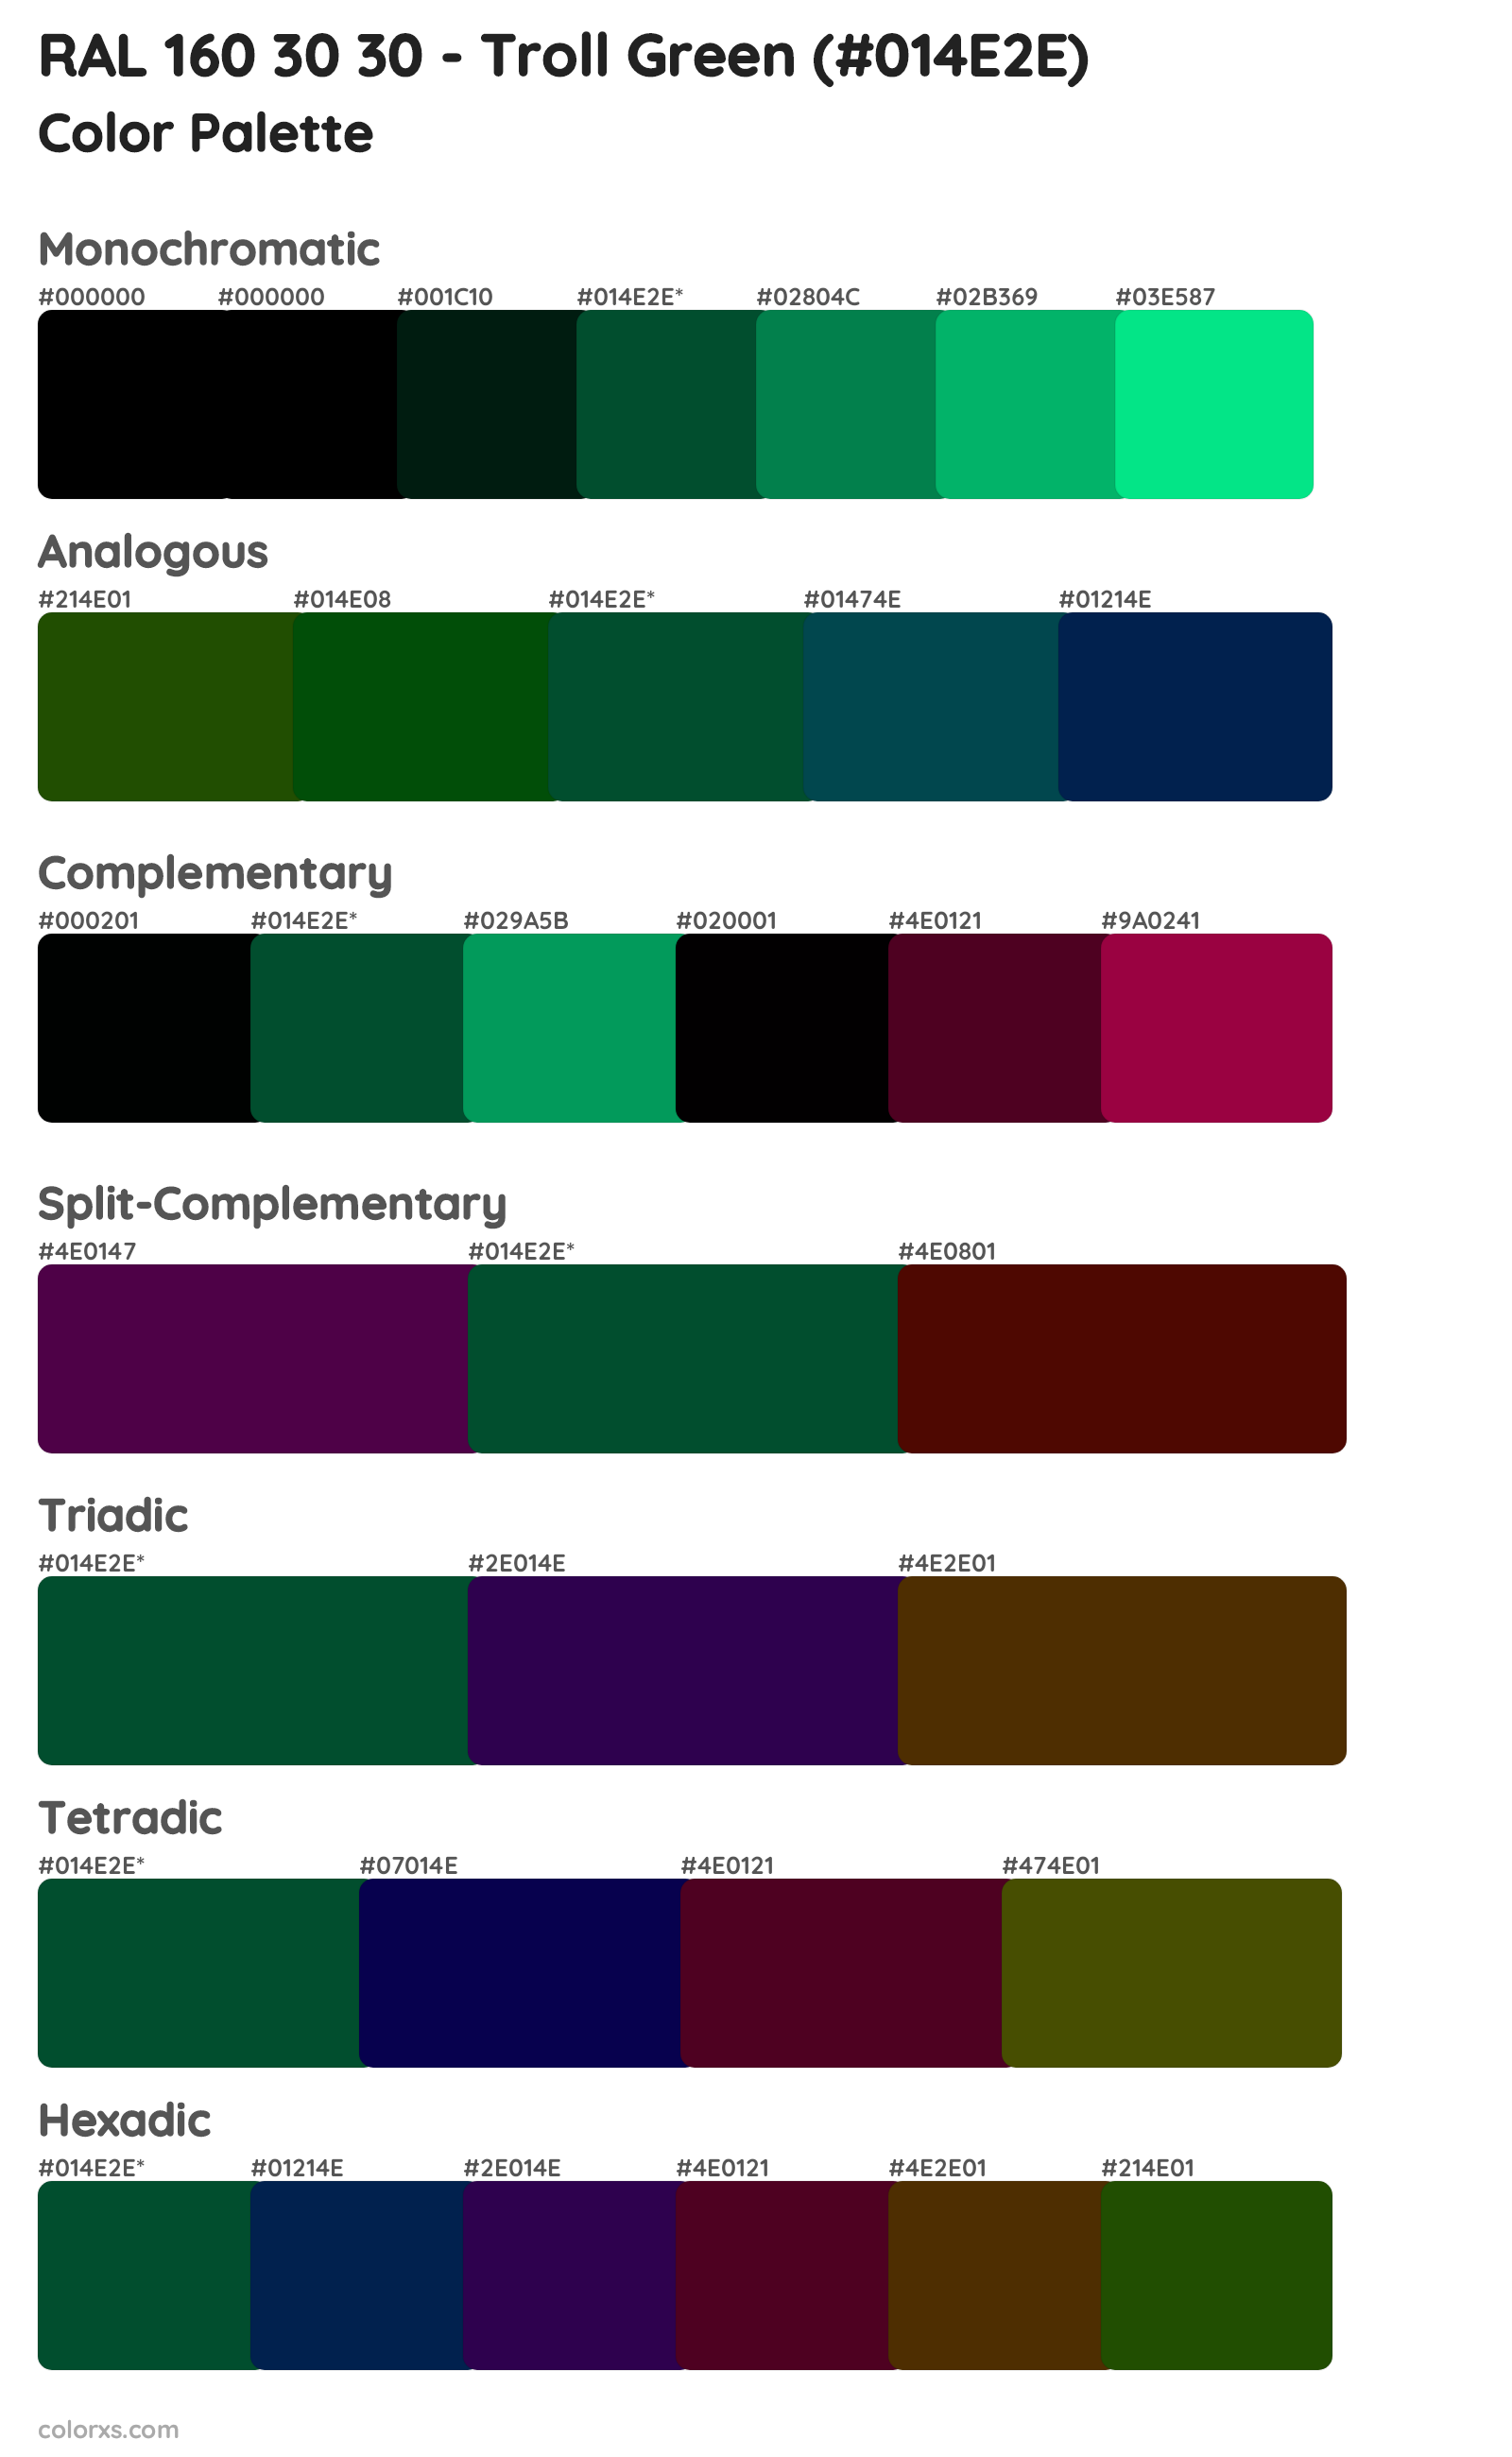 RAL 160 30 30 - Troll Green Color Scheme Palettes